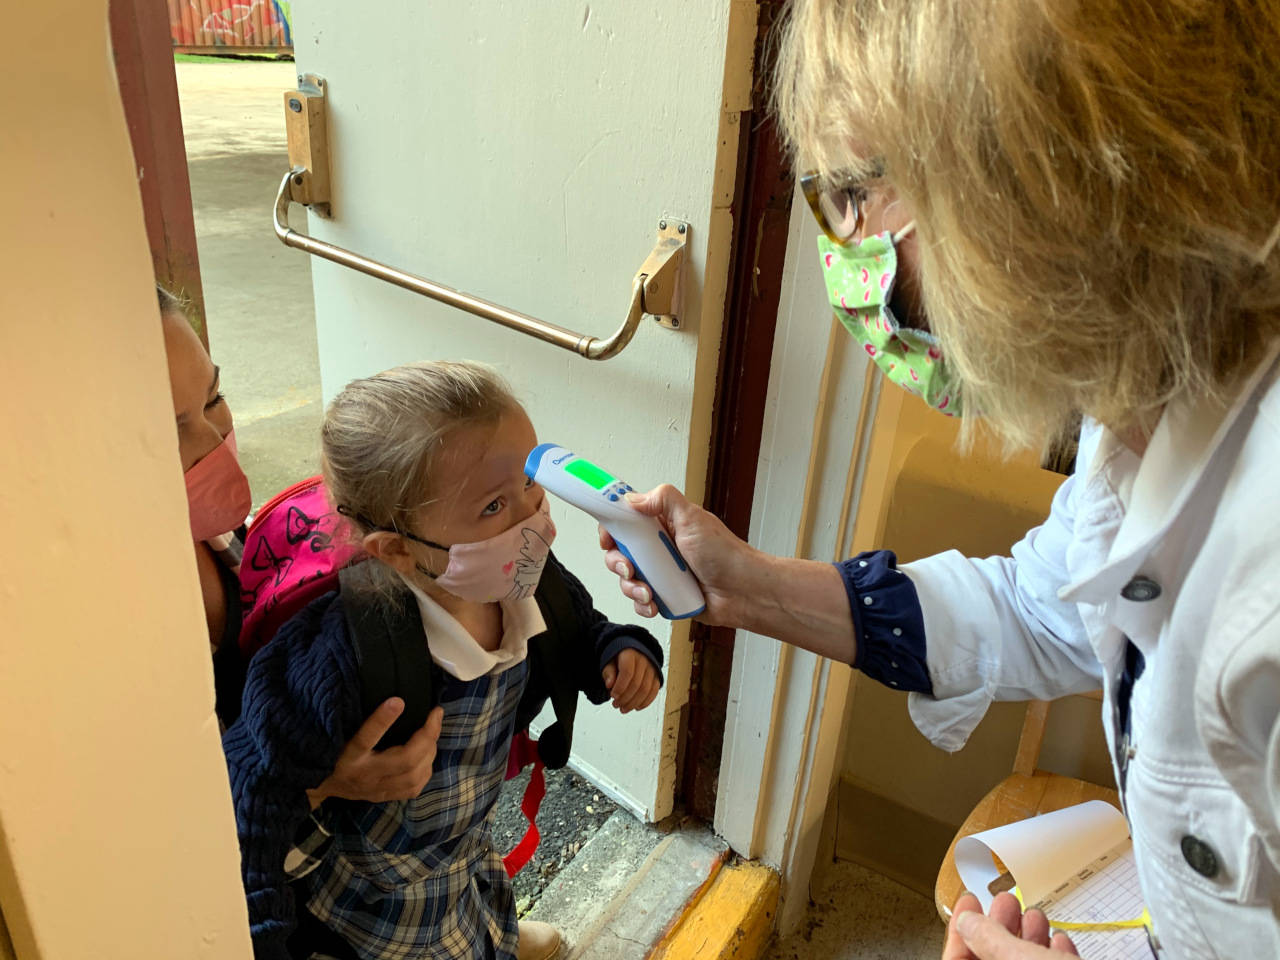 A student has her temperature checked by medical personnel before entering St. Mary School in Aberdeen. (Photo courtesy of St. Mary School)